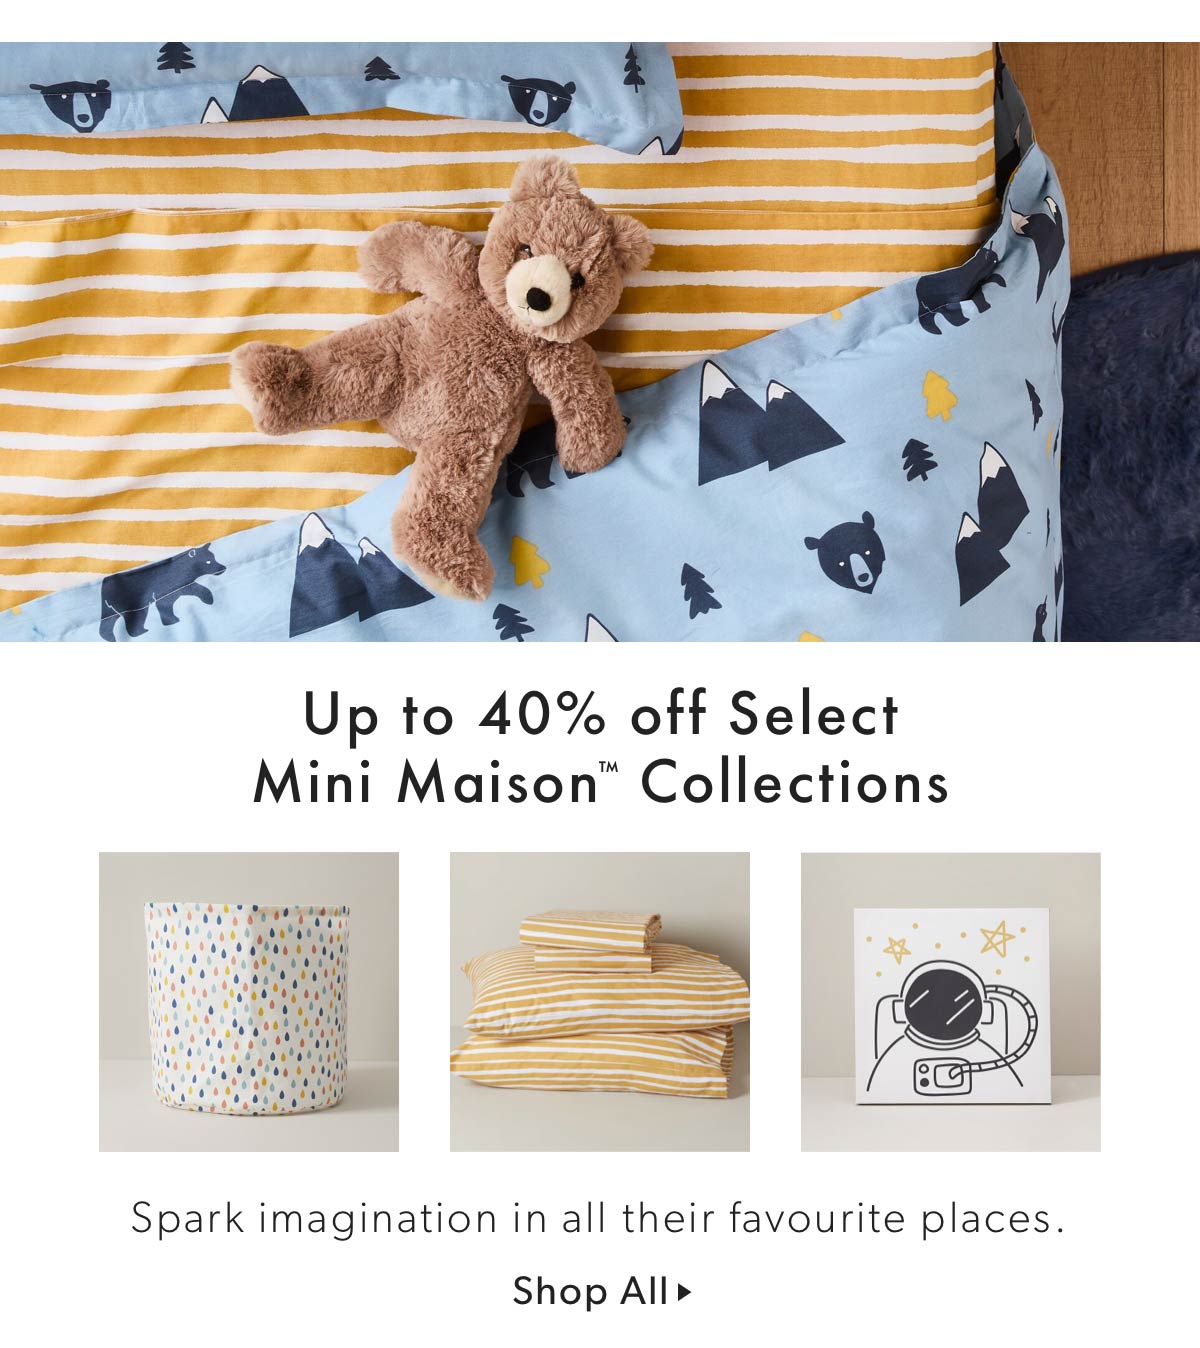 Up to 40% off Select Mini Maison Collections